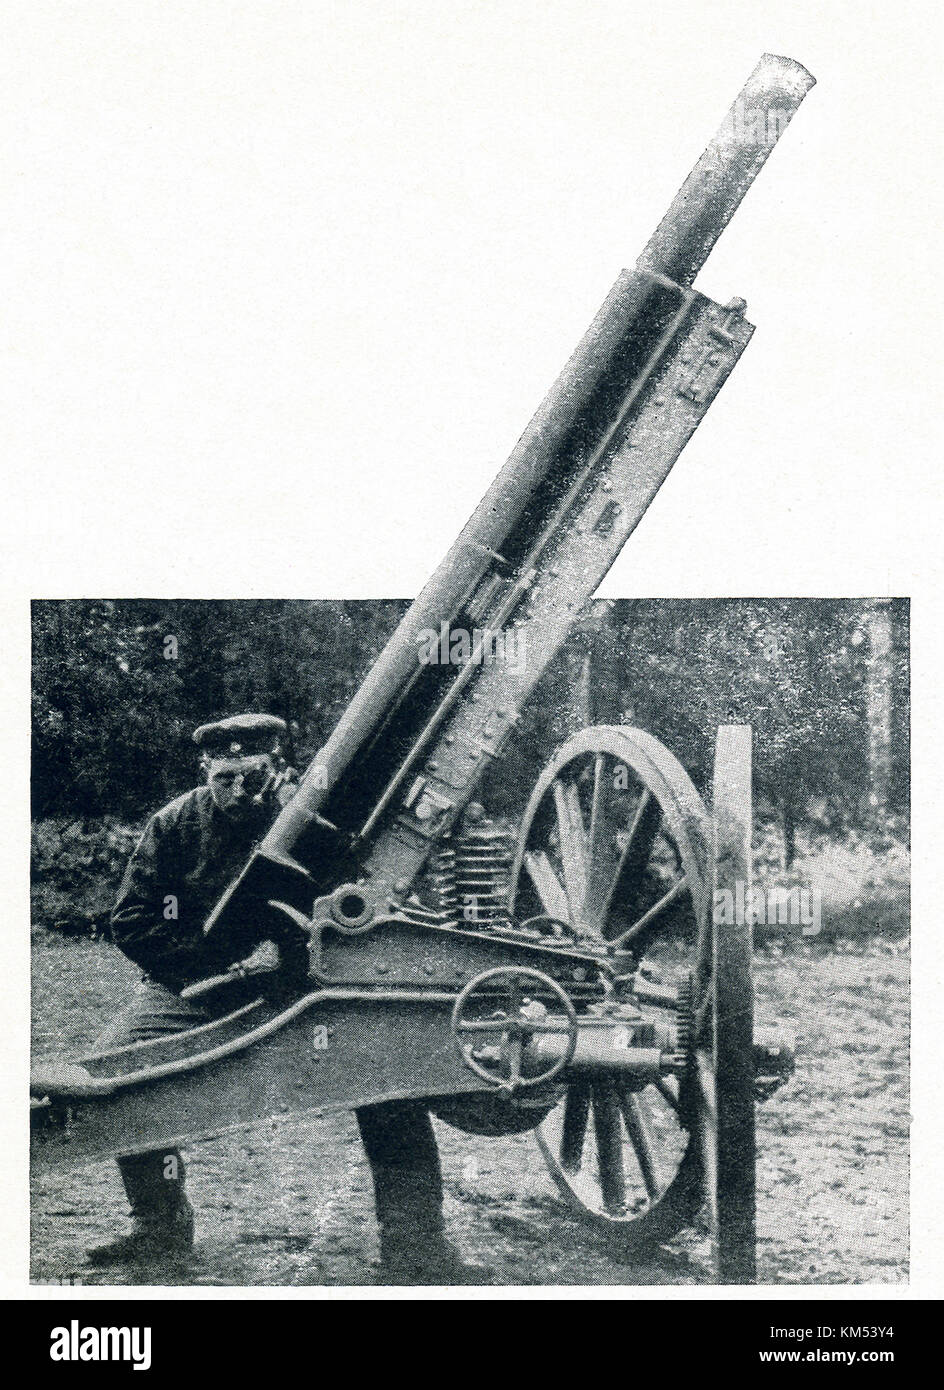 The caption that accompanied this phot that dates to around 1916, read: The latest product of the Krupps work is a specially designed gun for defense against the enemy of the clouds. The Krupps gun is a family of artillery pieces that several armies throughout the world have used starting with the 1800s. Krupp produced a 75 mm quick-firing gun that was used in World War I. Stock Photo